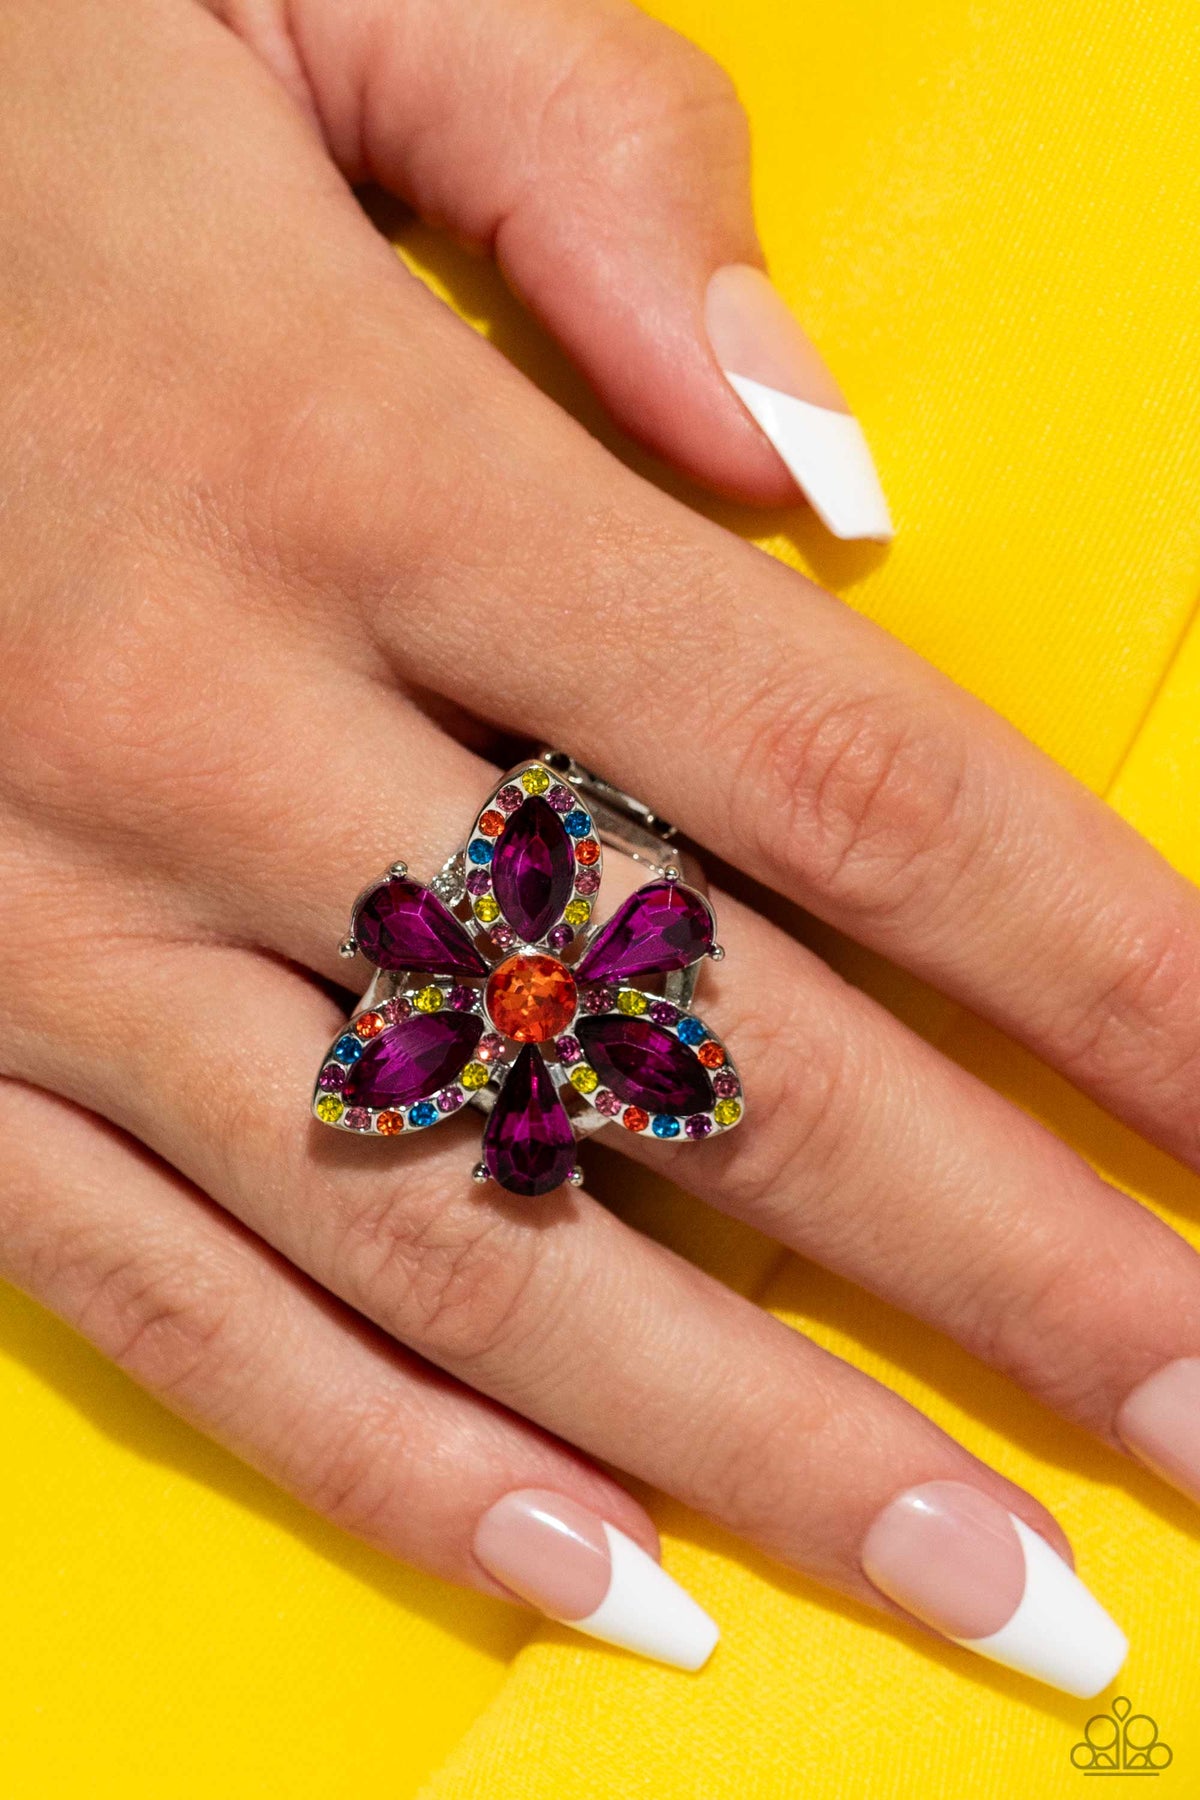 Blazing Blooms Multi &amp; Purple Rhinestone Floral Ring - Paparazzi Accessories-on model - CarasShop.com - $5 Jewelry by Cara Jewels